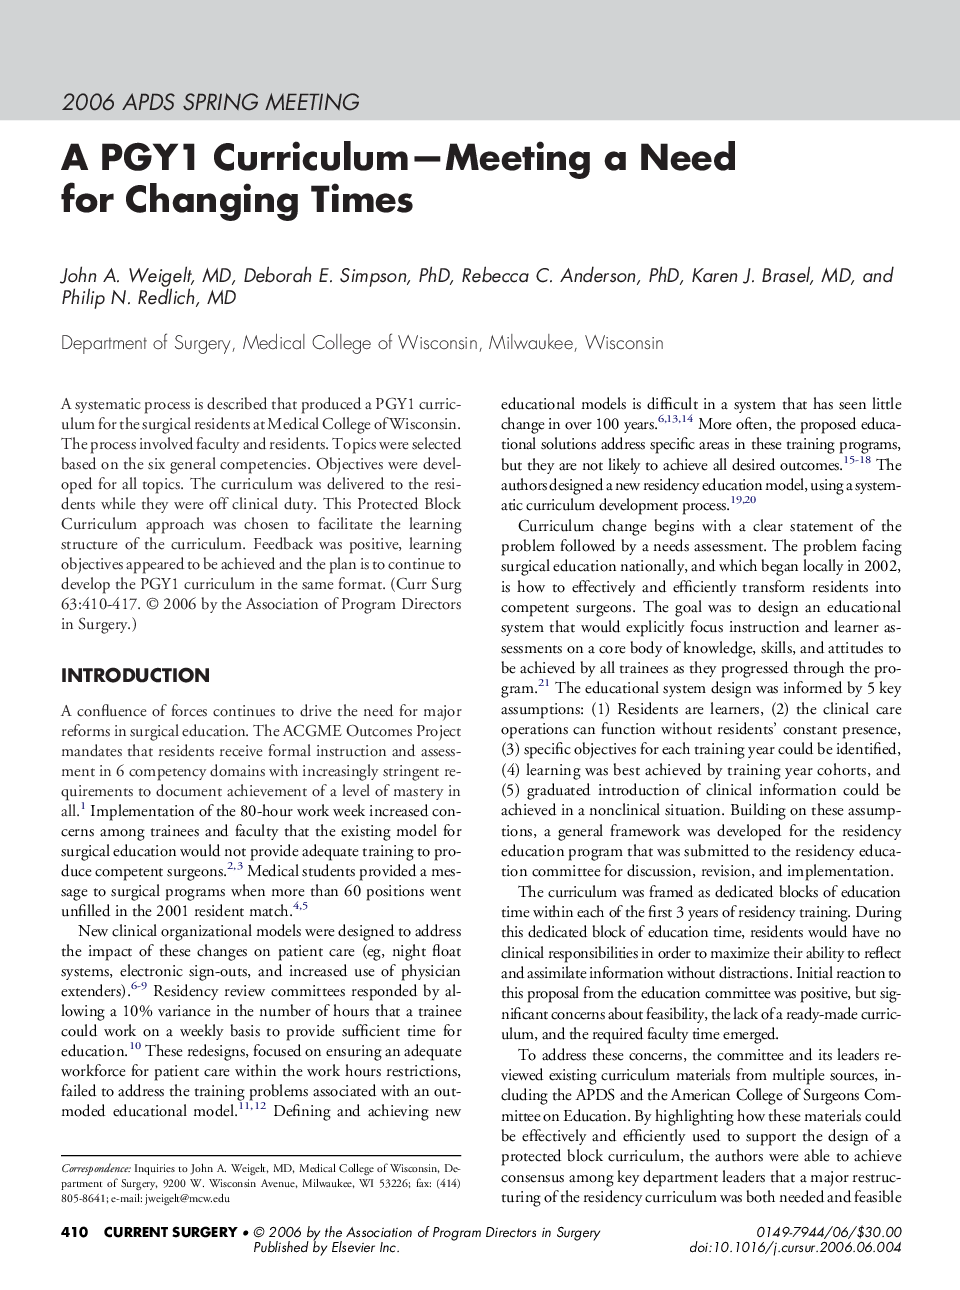 A PGY1 Curriculum—Meeting a Need for Changing Times